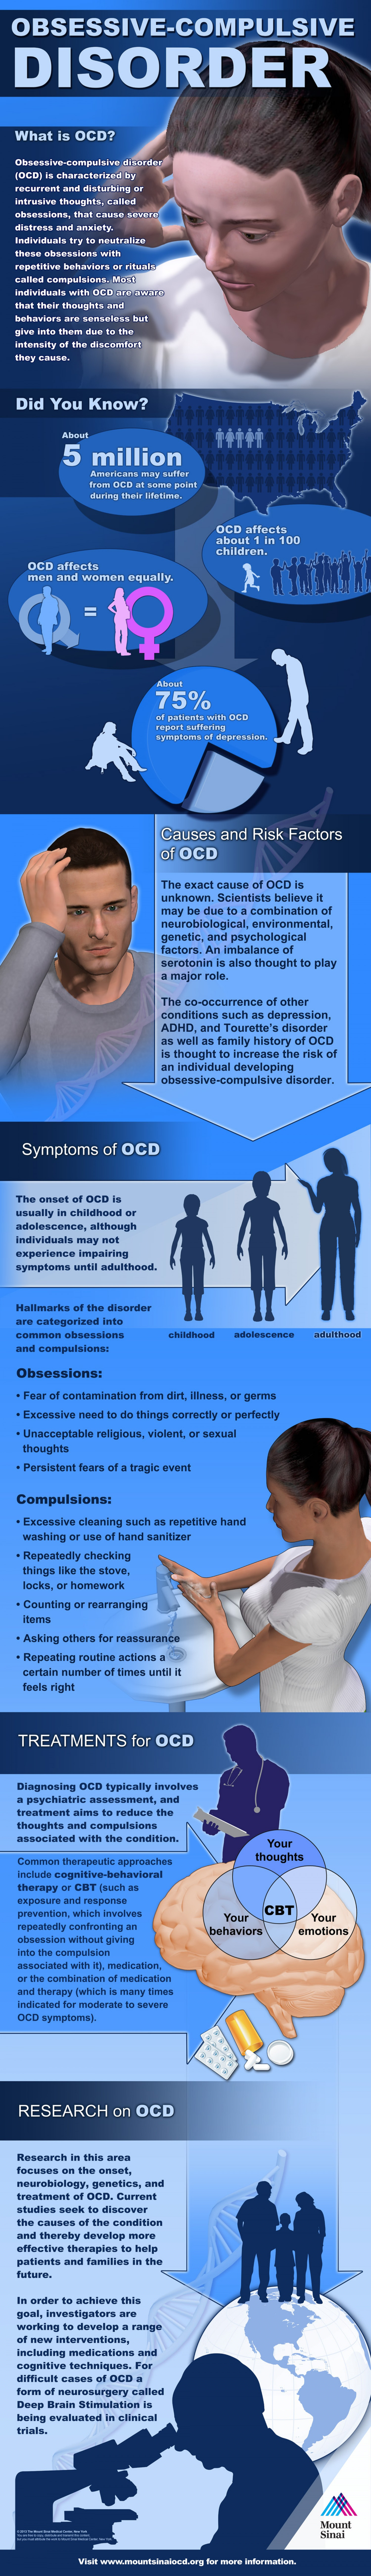 how to treat obsessive compulsive disorder